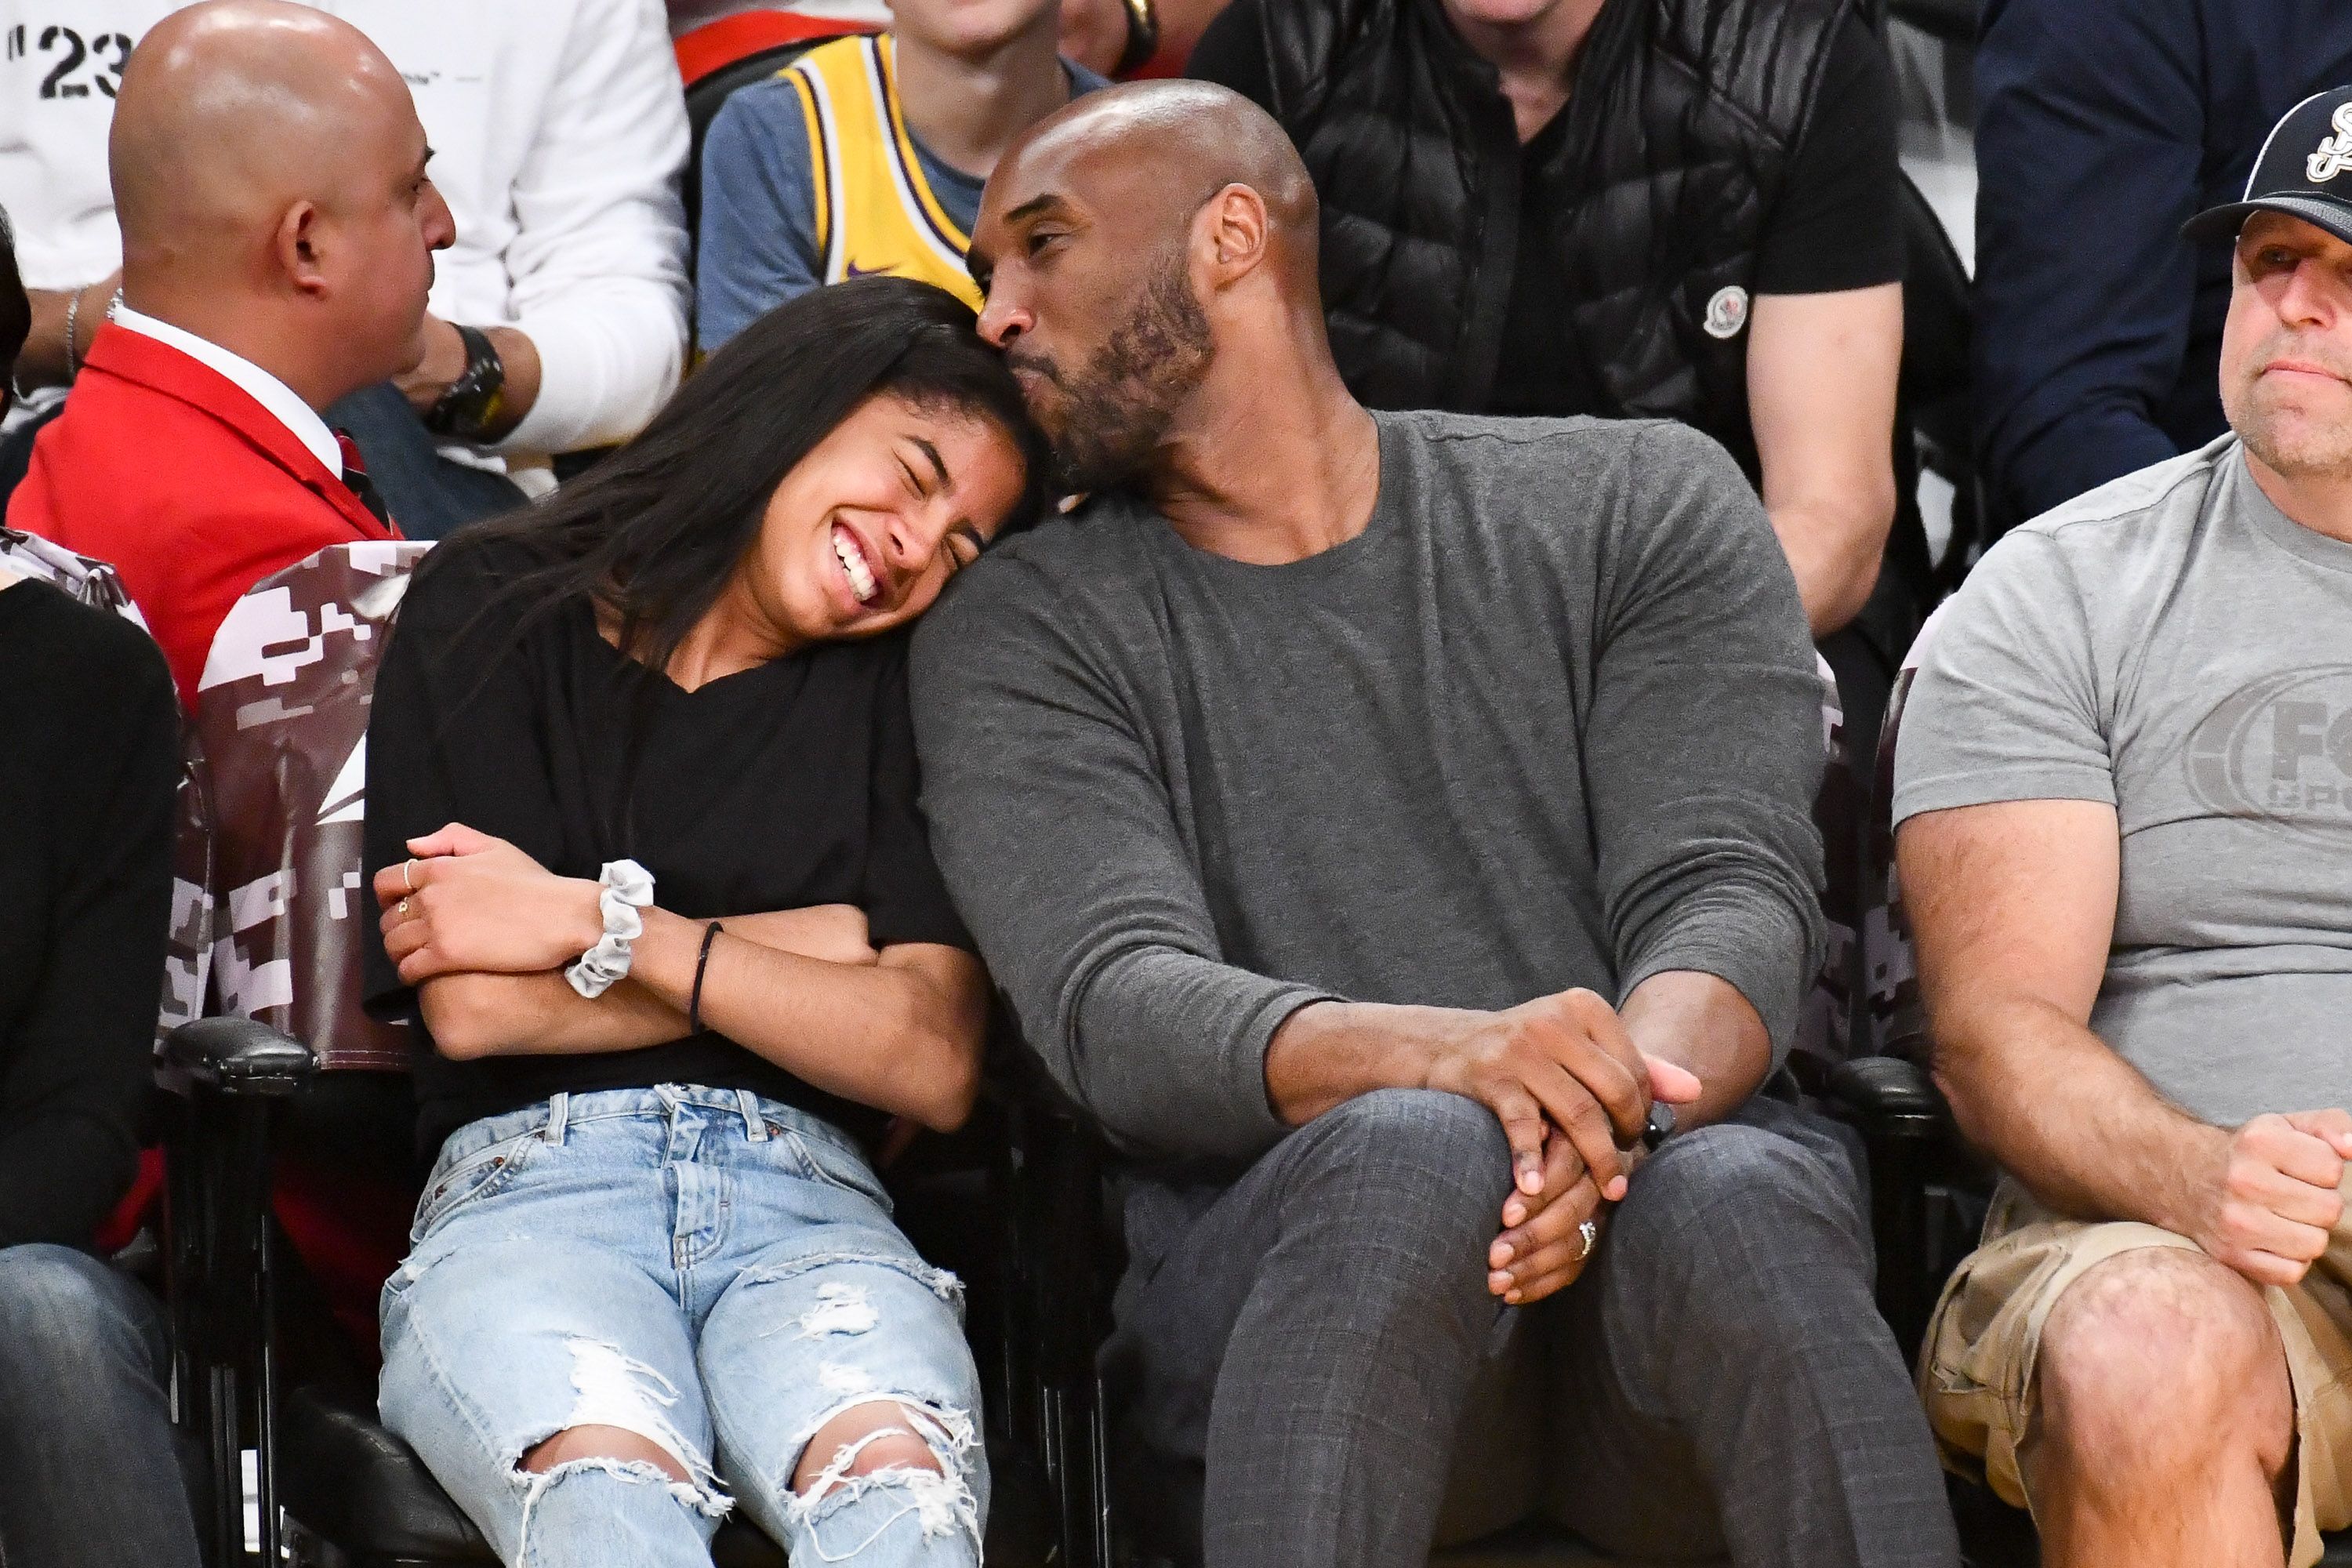 a picture of kobe and gigi